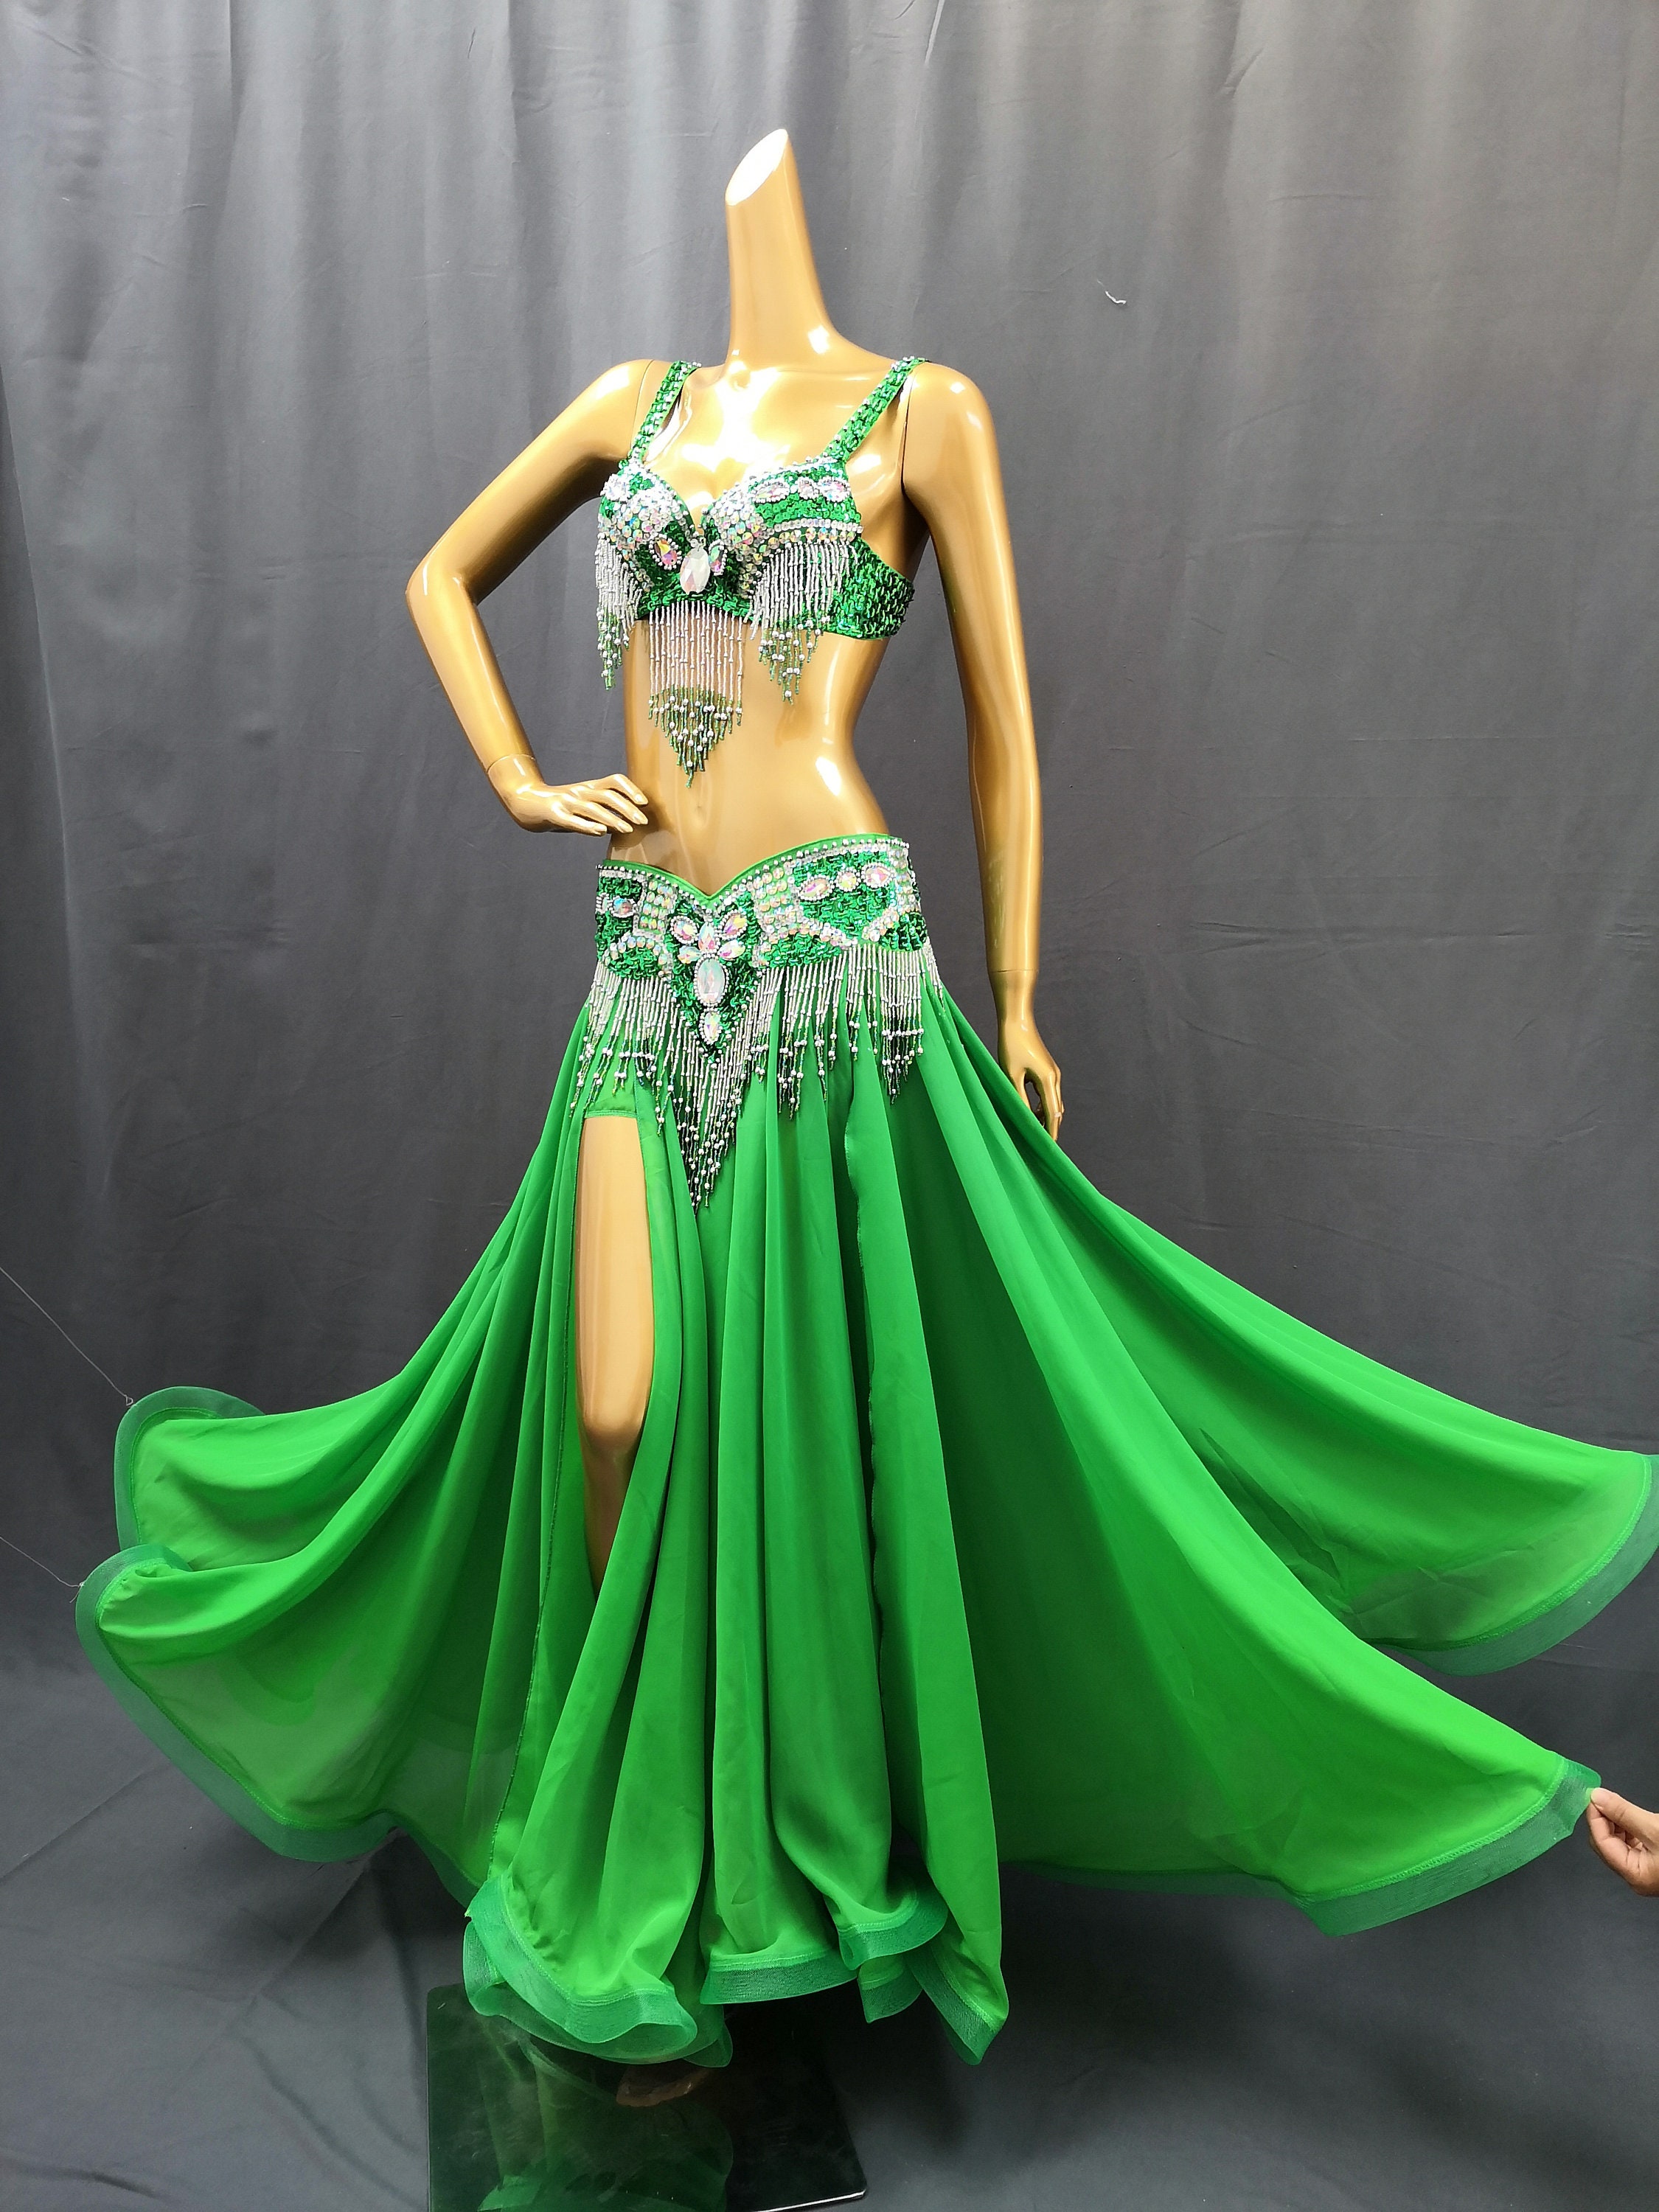 Modest Belly Dance Costume 